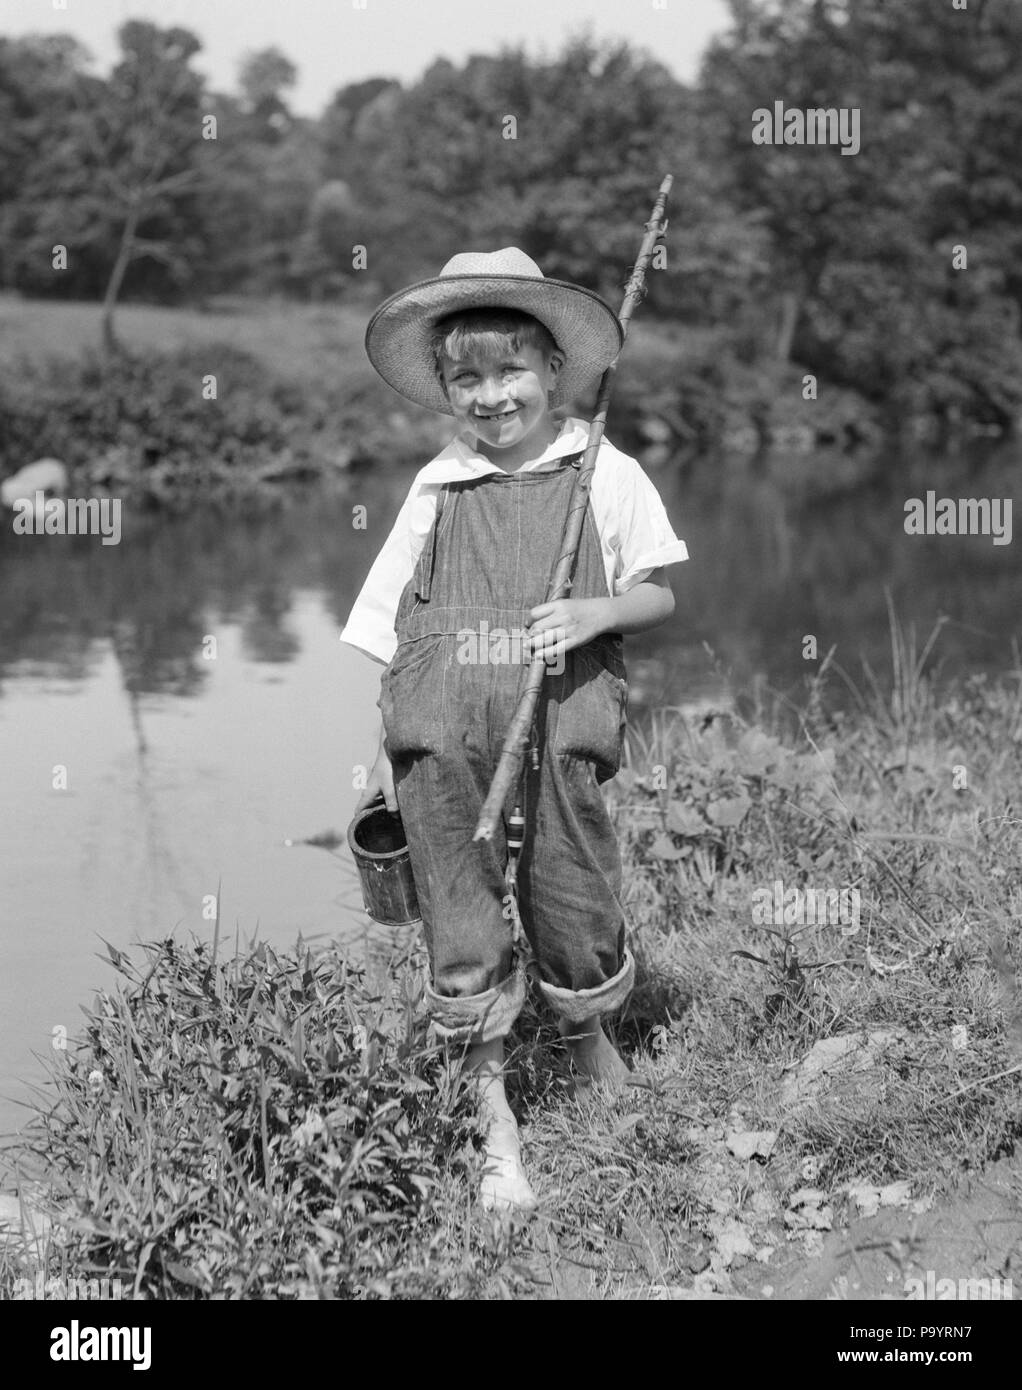 1920s 1930s BAREFOOT BOY CARRYING STICK FISHING ROD CAN OF BAIT WORMS  WEARING STRAW HAT BIB OVERALLS LOOKING AT CAMERA SMILING - a4795 HAR001  HARS COPY SPACE FULL-LENGTH OVERALLS STREAM MALES ROD